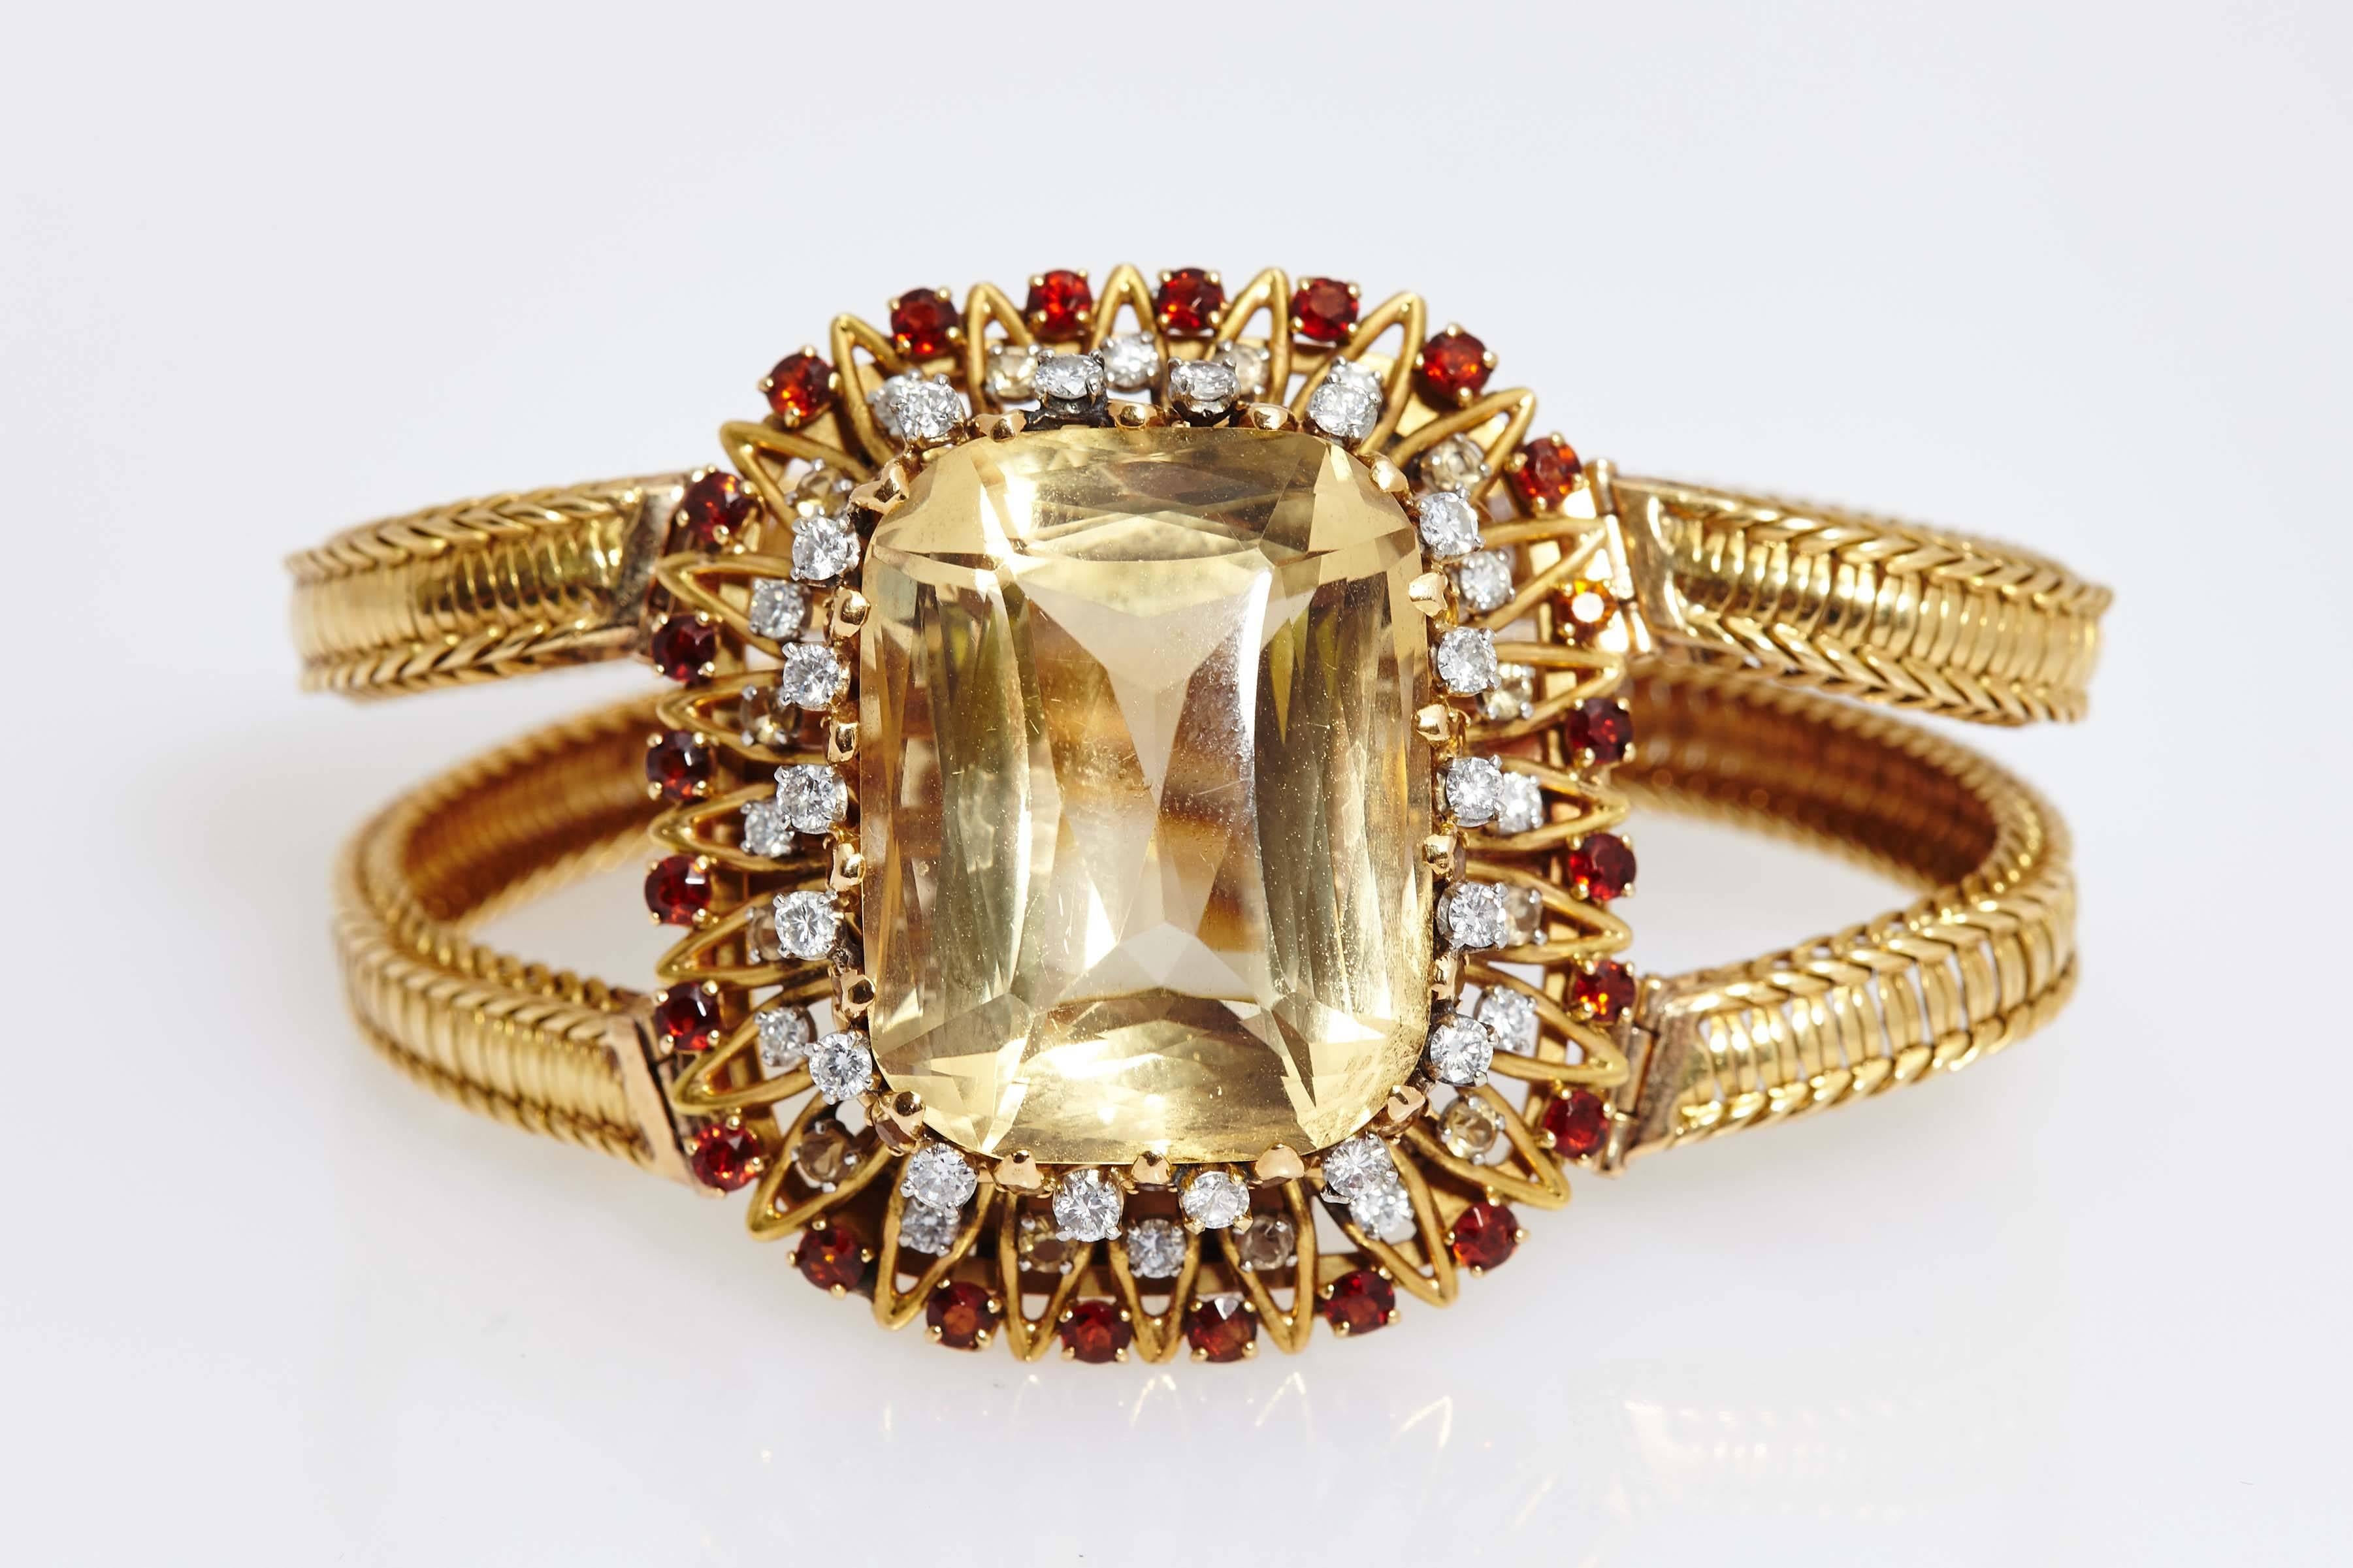 1950s Pierre Sterle Retro Citrine Garnets Diamonds Gold Bracelet  In Excellent Condition For Sale In New York, NY